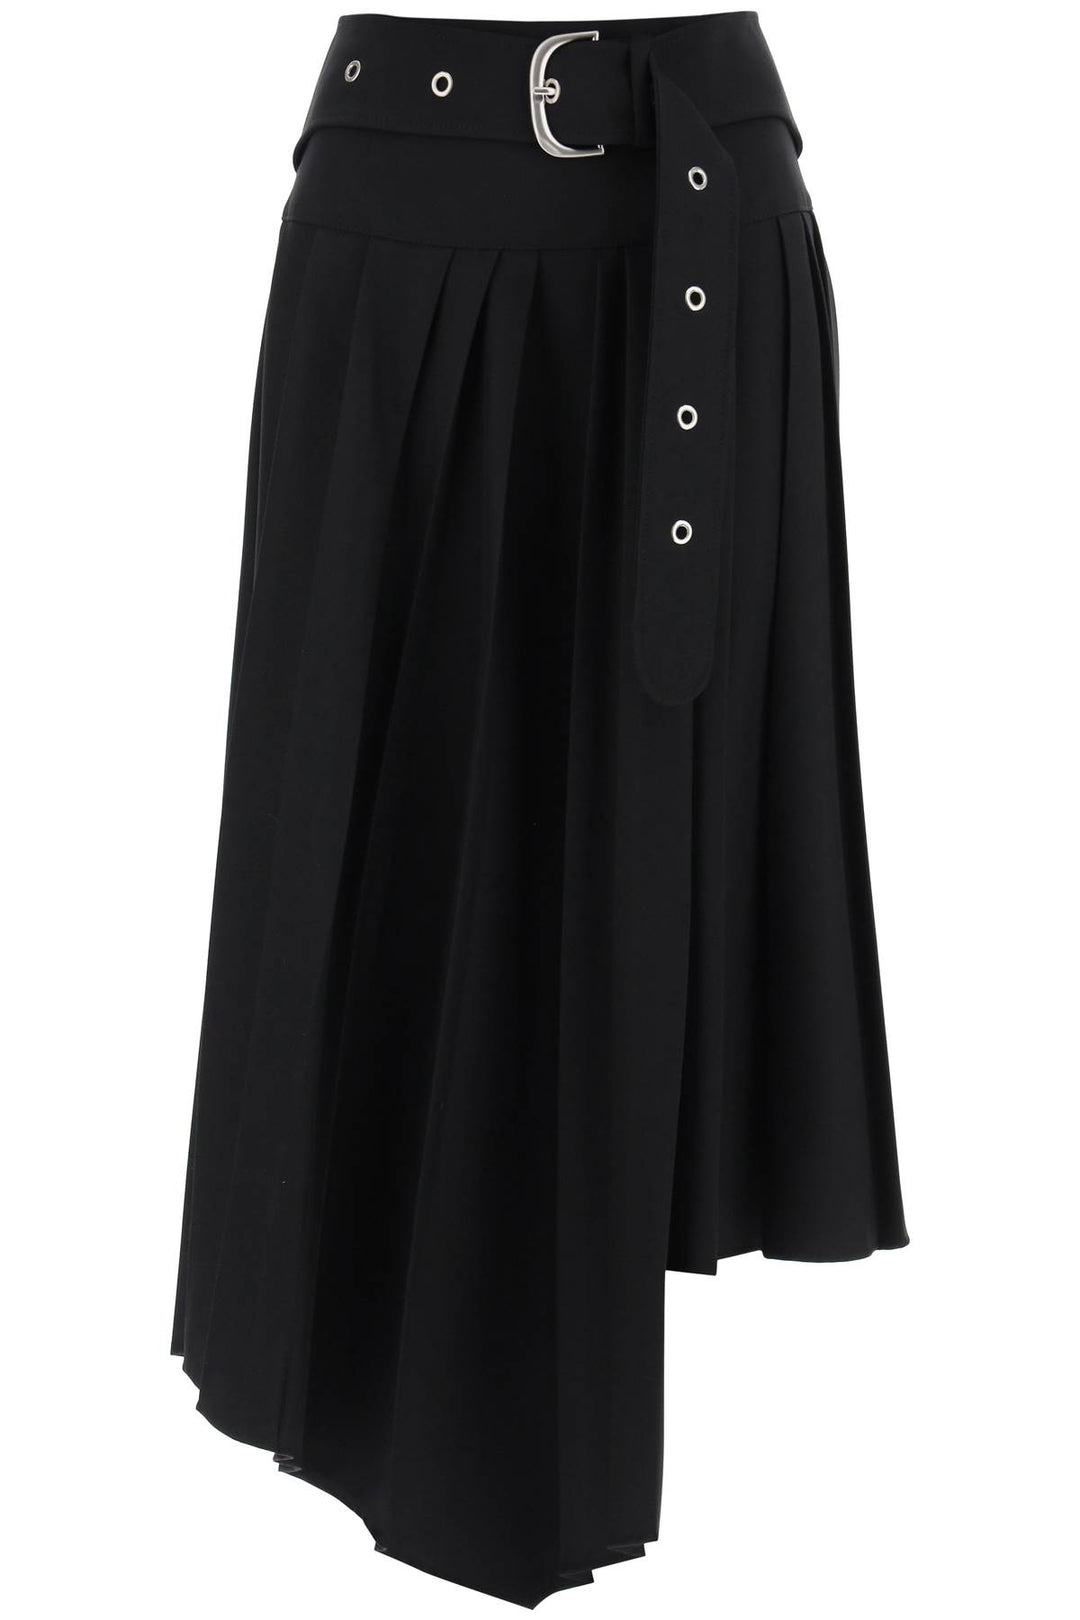 Off White Belted Tech Drill Pleated Skirt   Nero